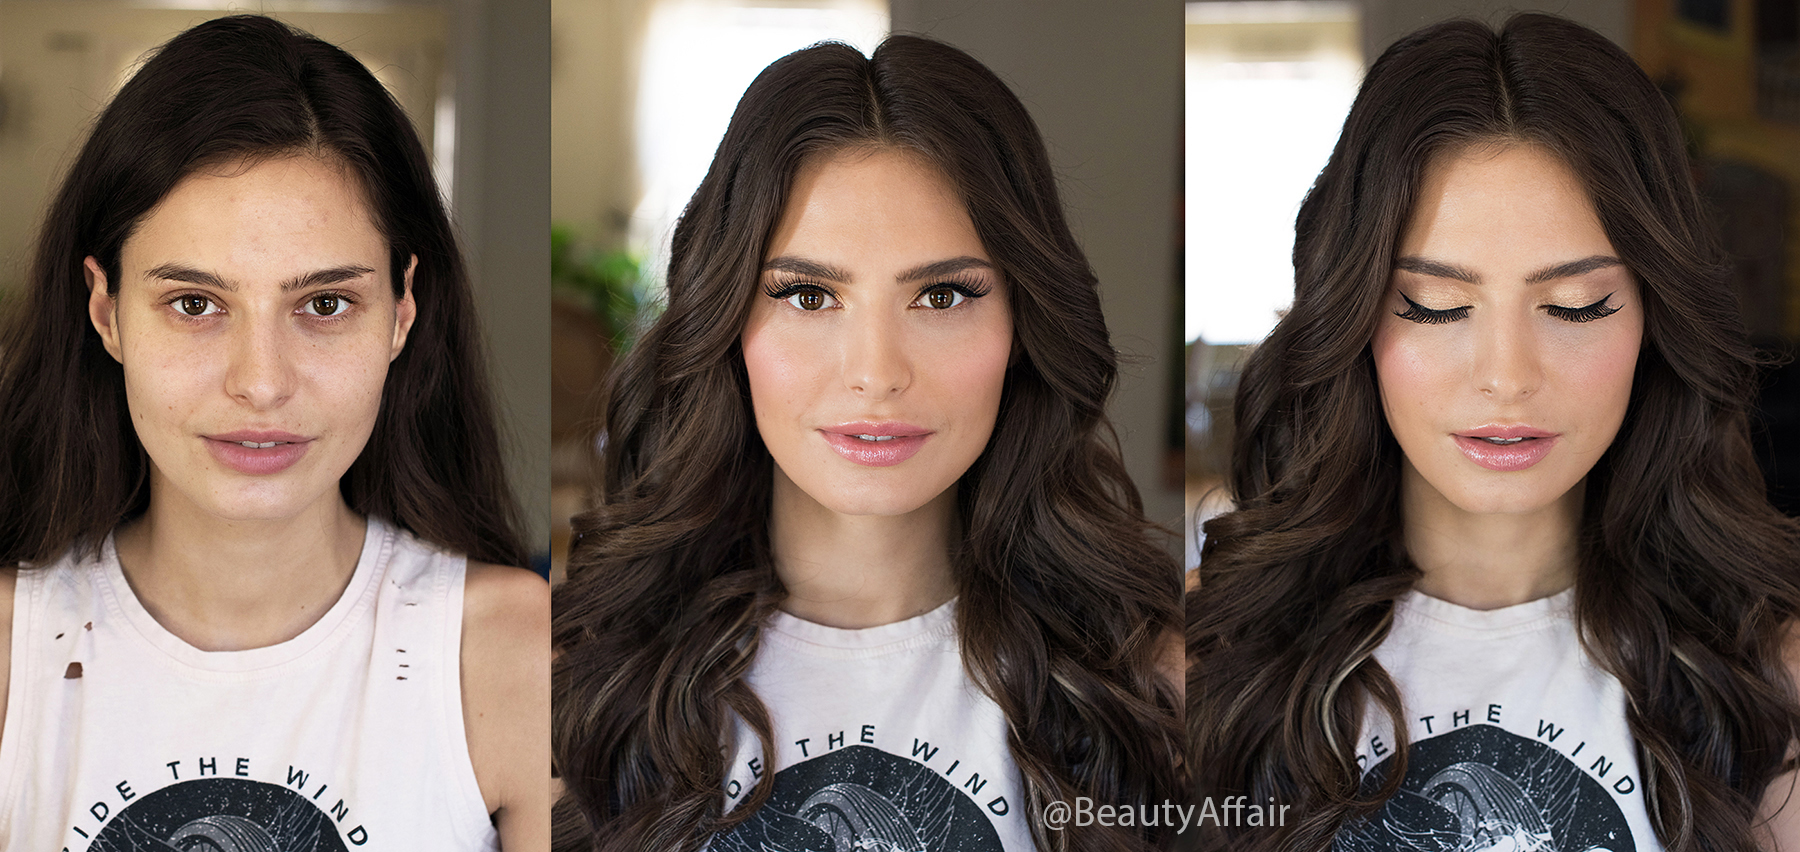 airbrush before and after Temptu Makeup and waves glam hair bronze goddess straight hair Beauty Affair-Recovered copy copy.jpg